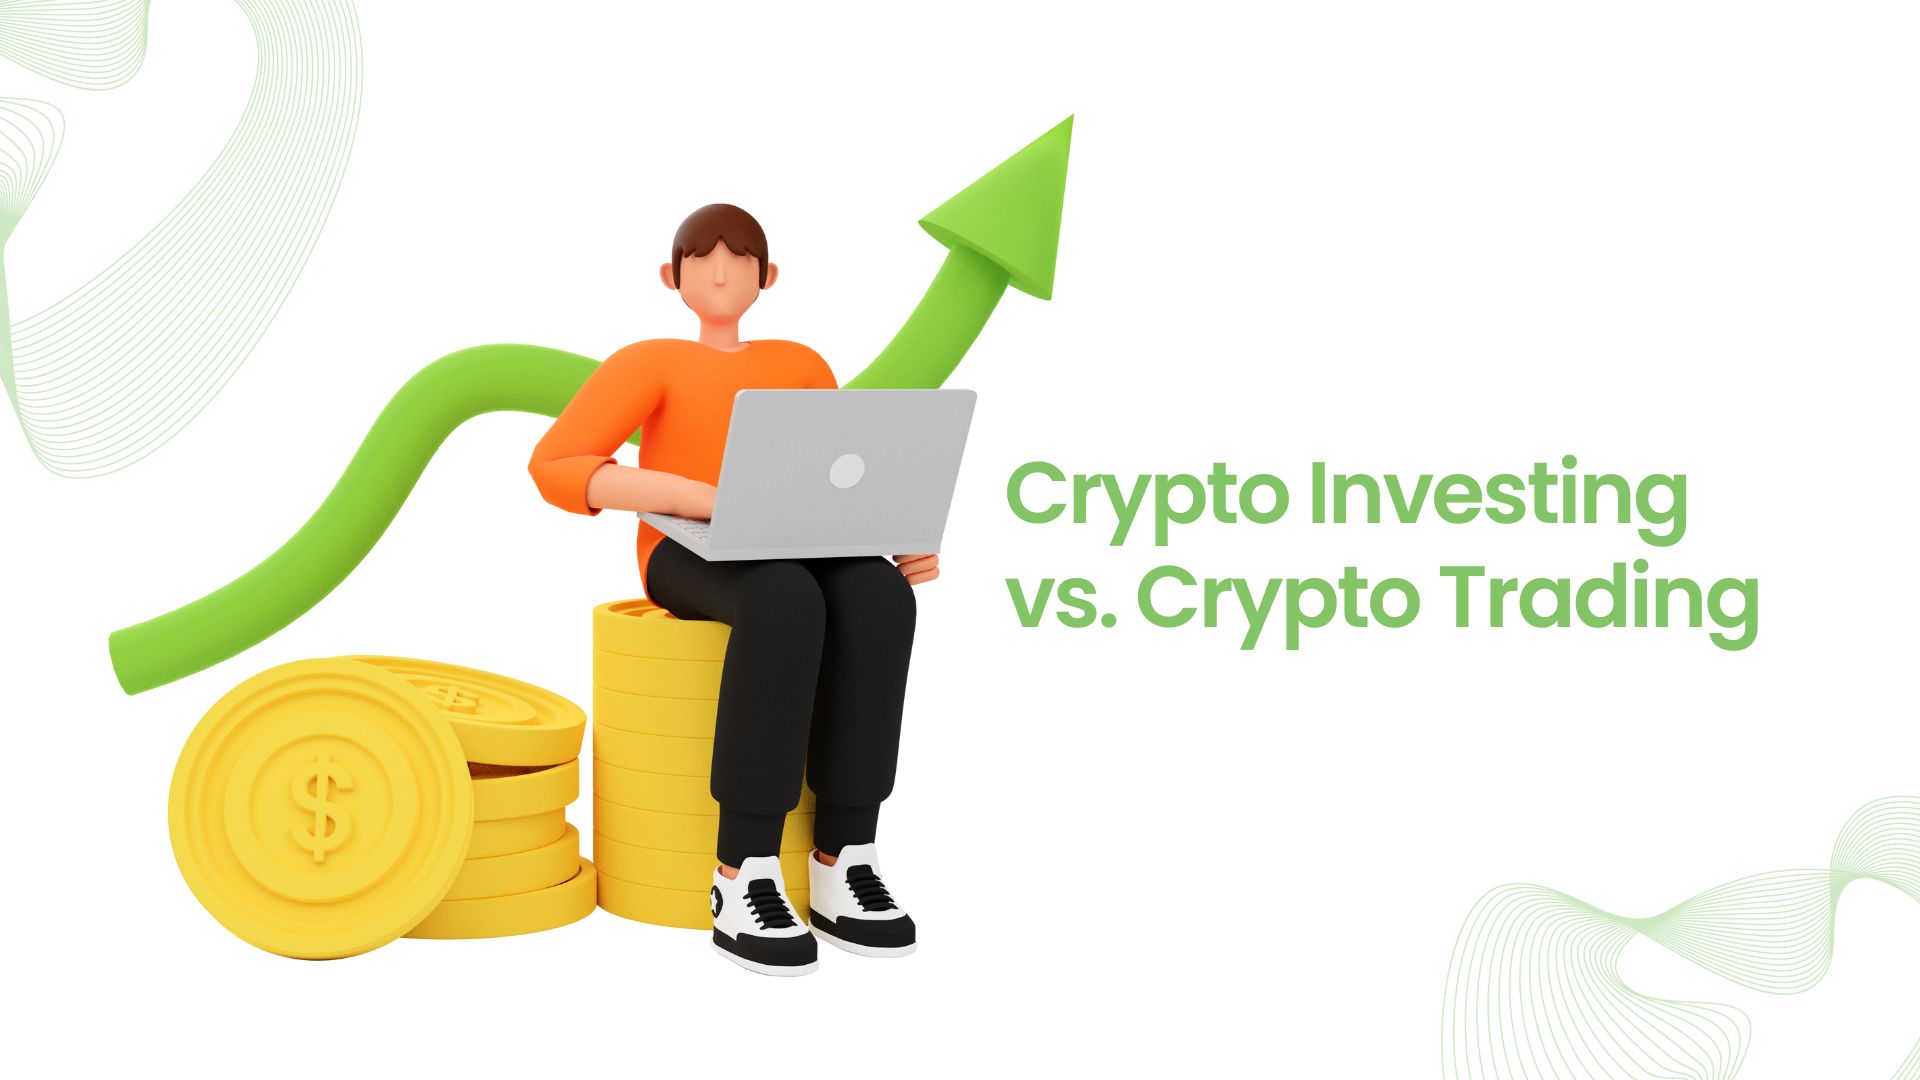 Crypto Investing vs. Crypto Trading: 3 Major Differences